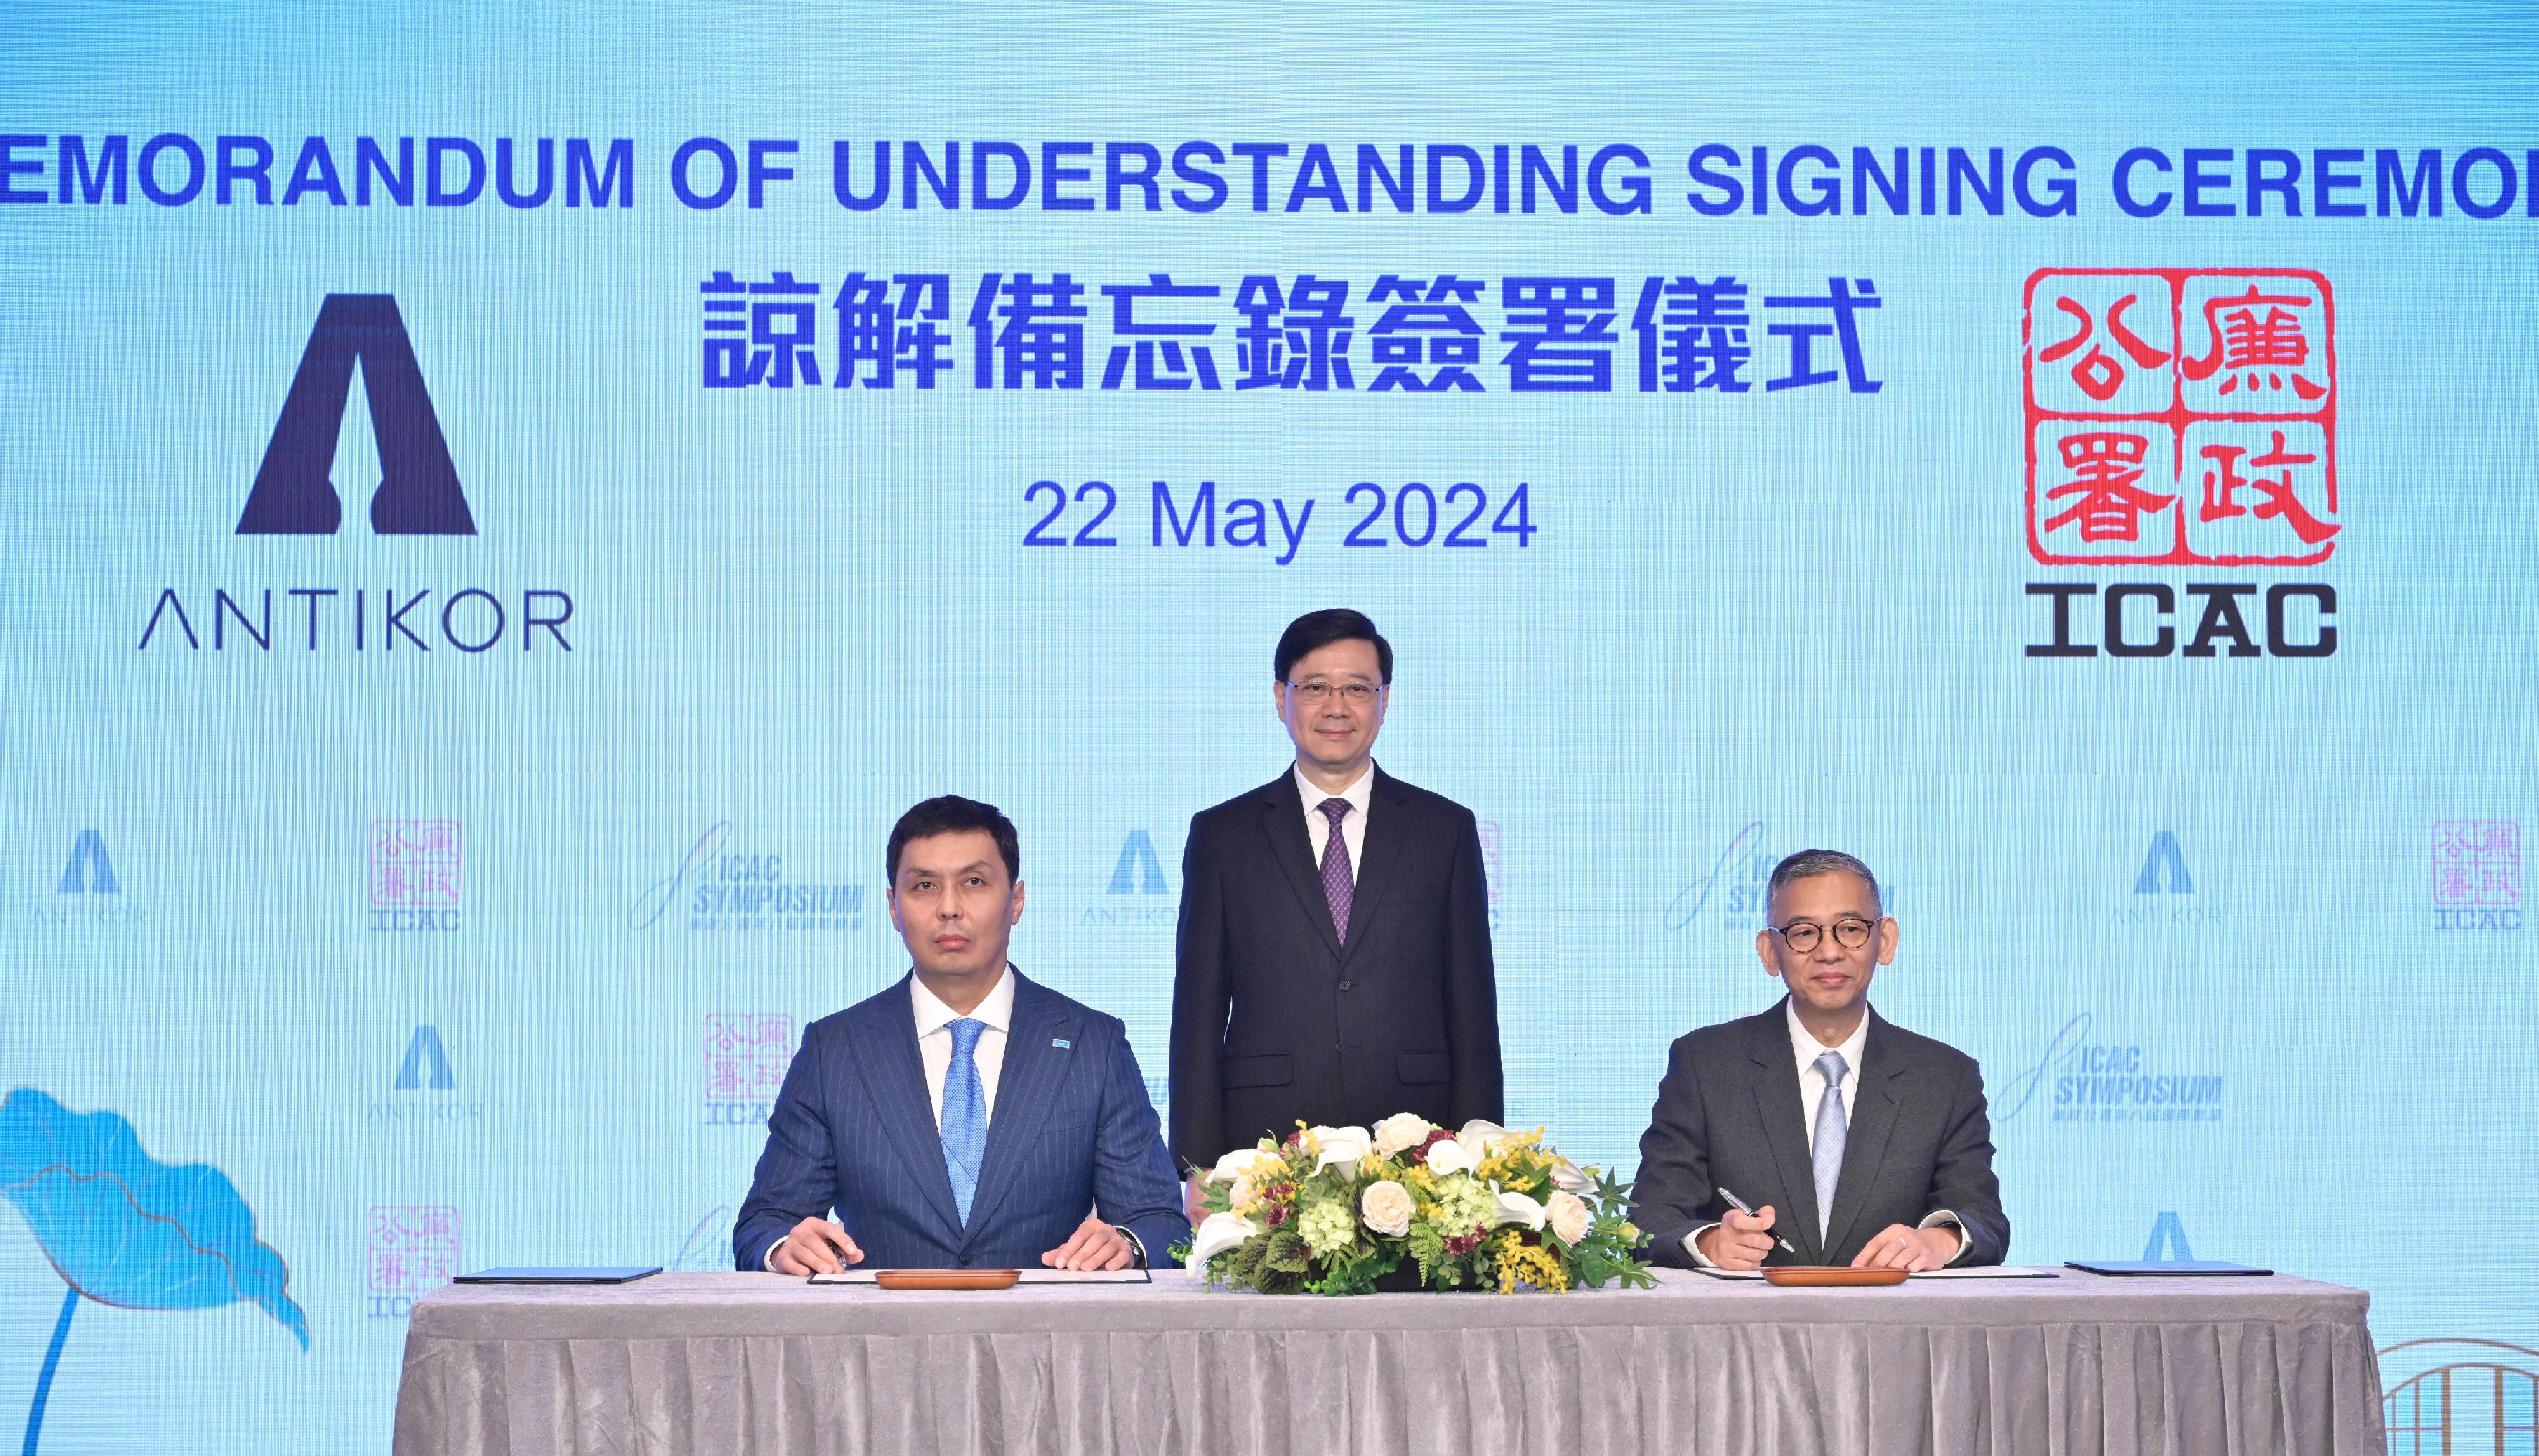 The Chief Executive, Mr John Lee, attended the 8th ICAC (Independent Commission Against Corruption) Symposium today (May 22). Photo shows Mr Lee (centre) witnessing the ICAC Commissioner, Mr Woo Ying-ming (right) and the Chairman of the Anti-corruption Agency of the Republic of Kazakhstan, Mr Askhat Zhumagali (left), signing a Memorandum of Understanding.